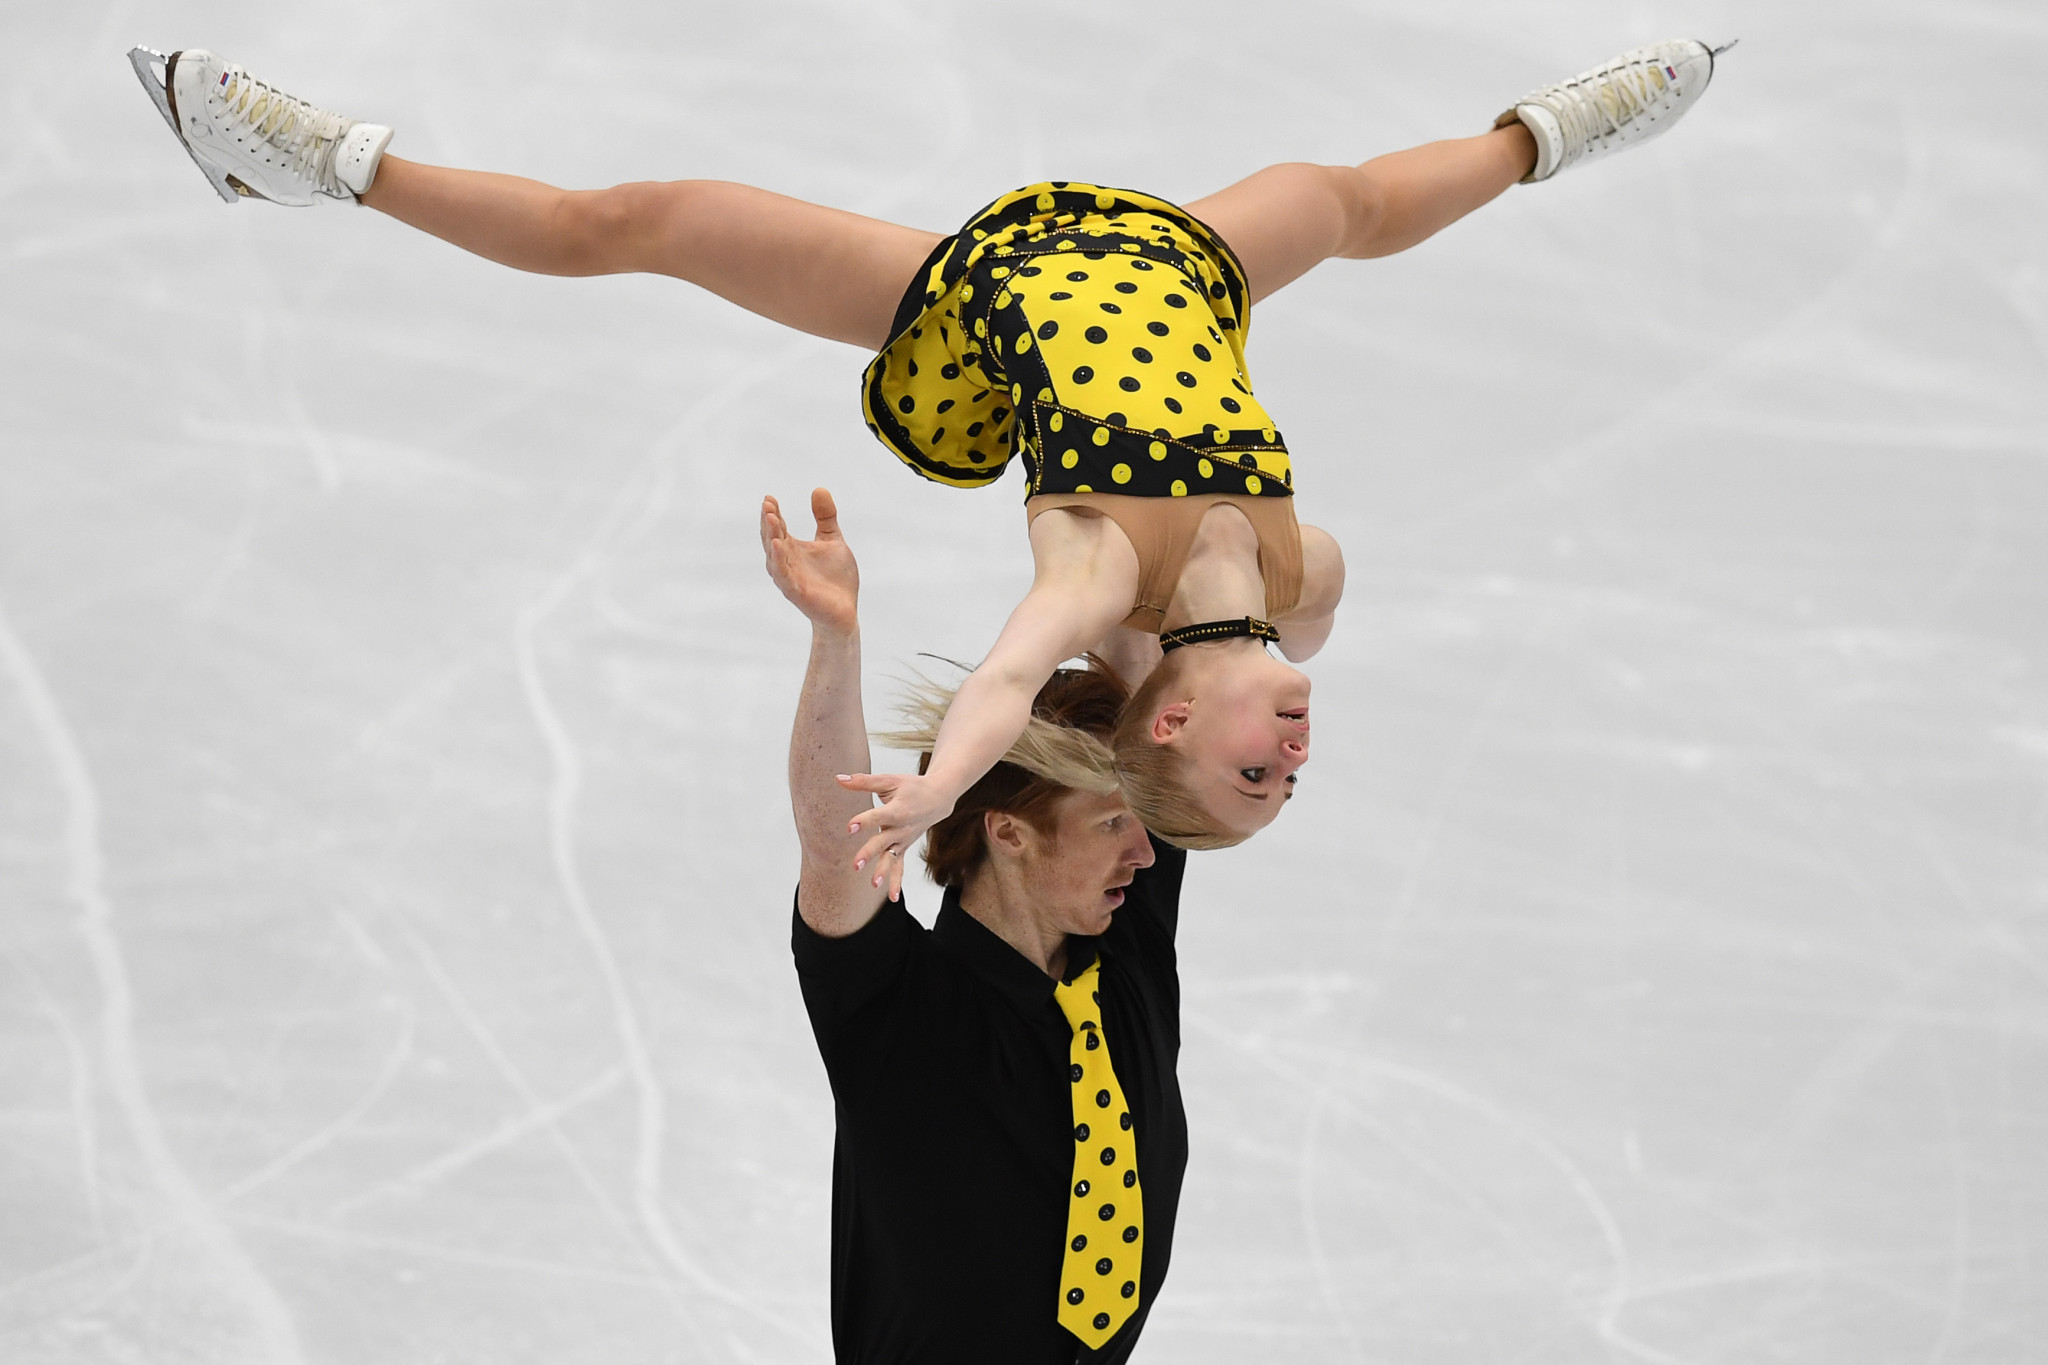 Morozov and Evgenia Tarasova have won two European pairs titles ©Getty Images